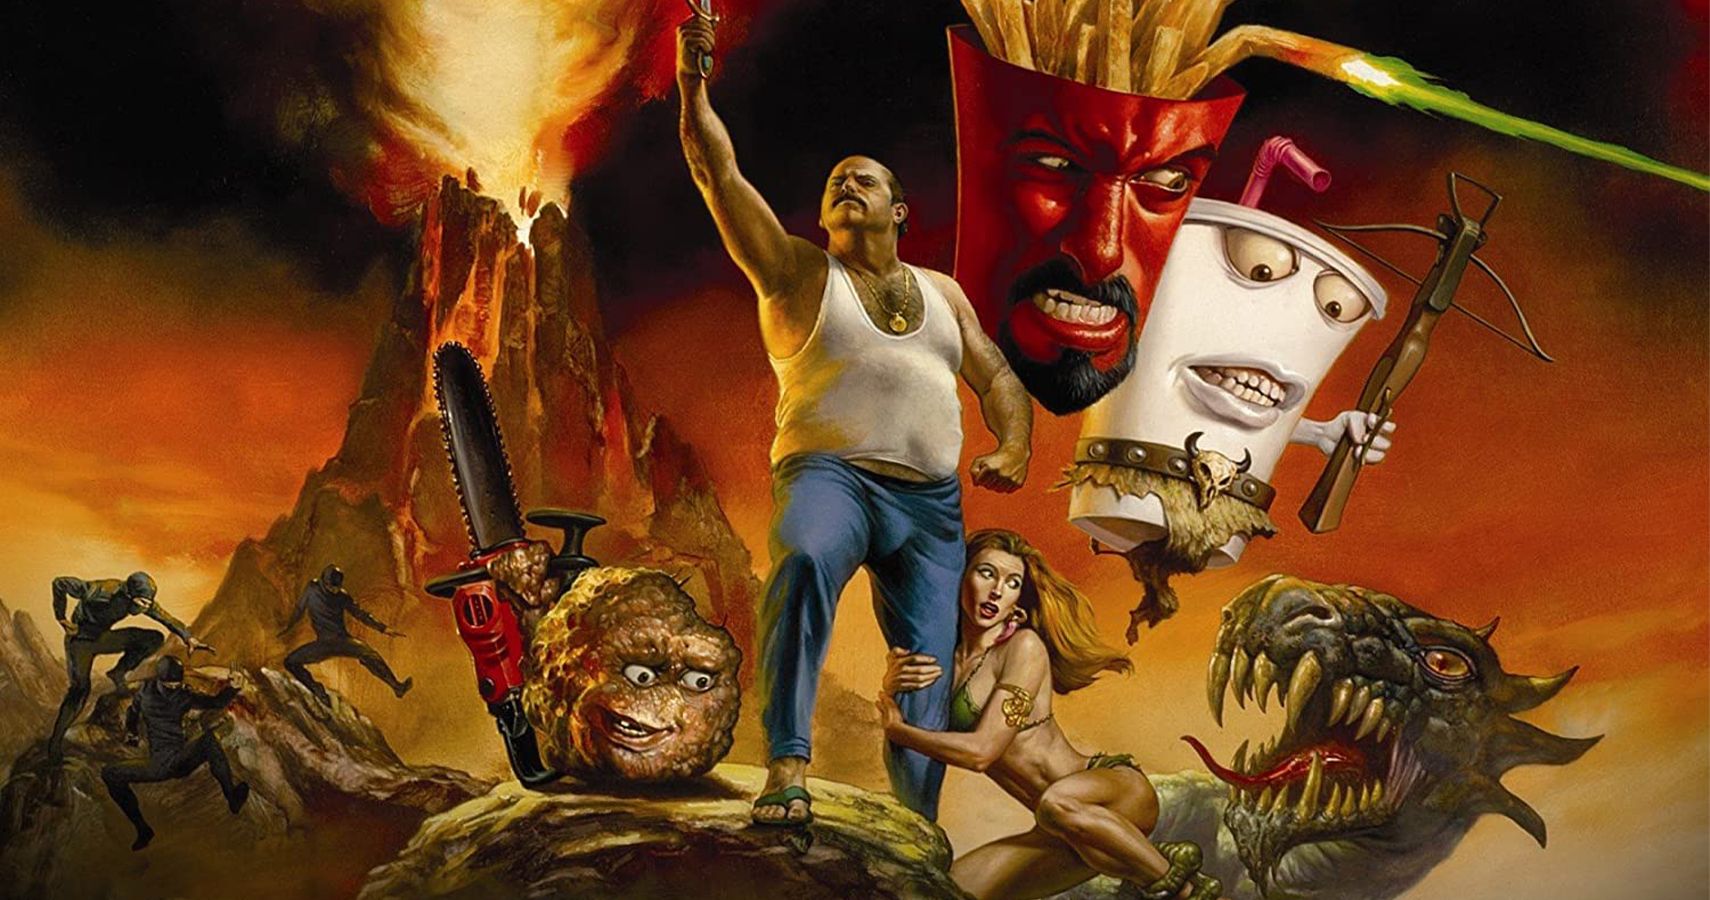 Aqua Teen Hunger Force The 10 Most WTF Moments On The Crazy Adult Swim Show image image